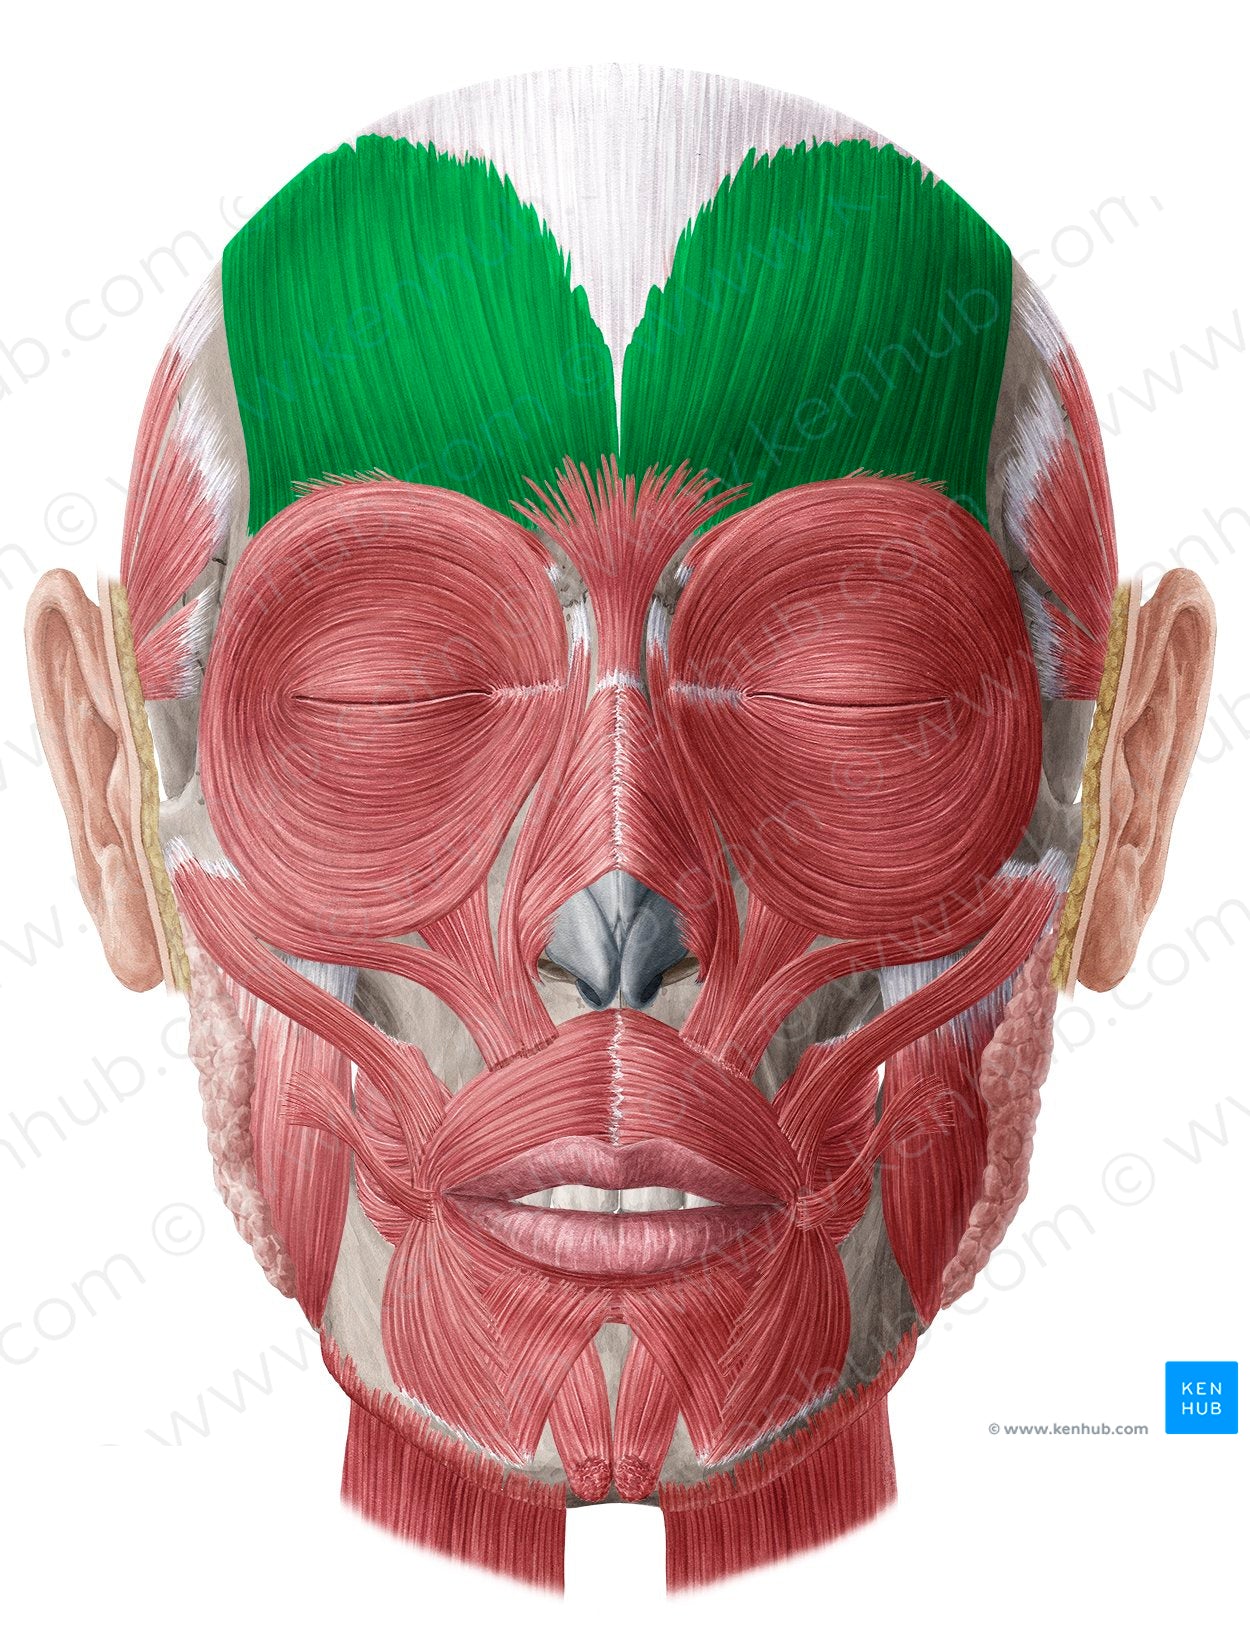 Frontalis muscle (#5387)